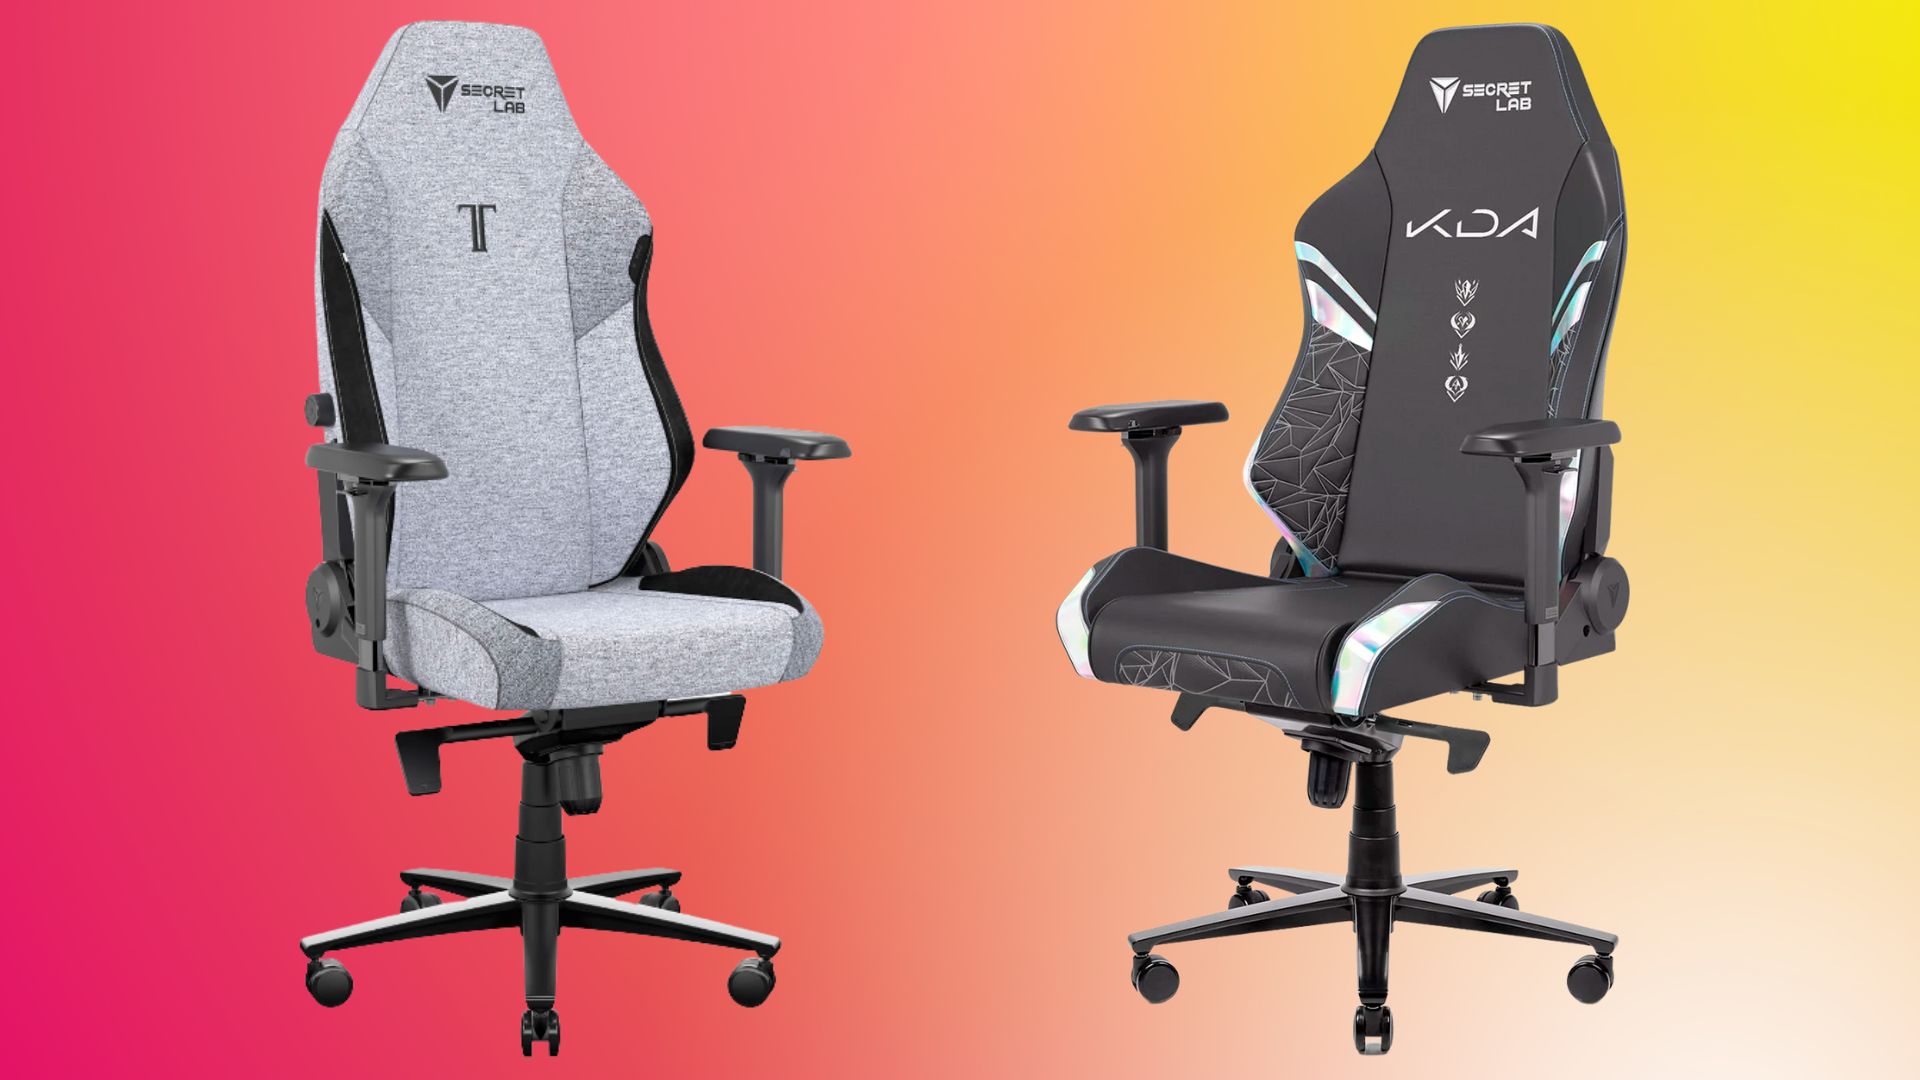 Is the Secretlab Titan 2022 gaming chair worth the upgrade?